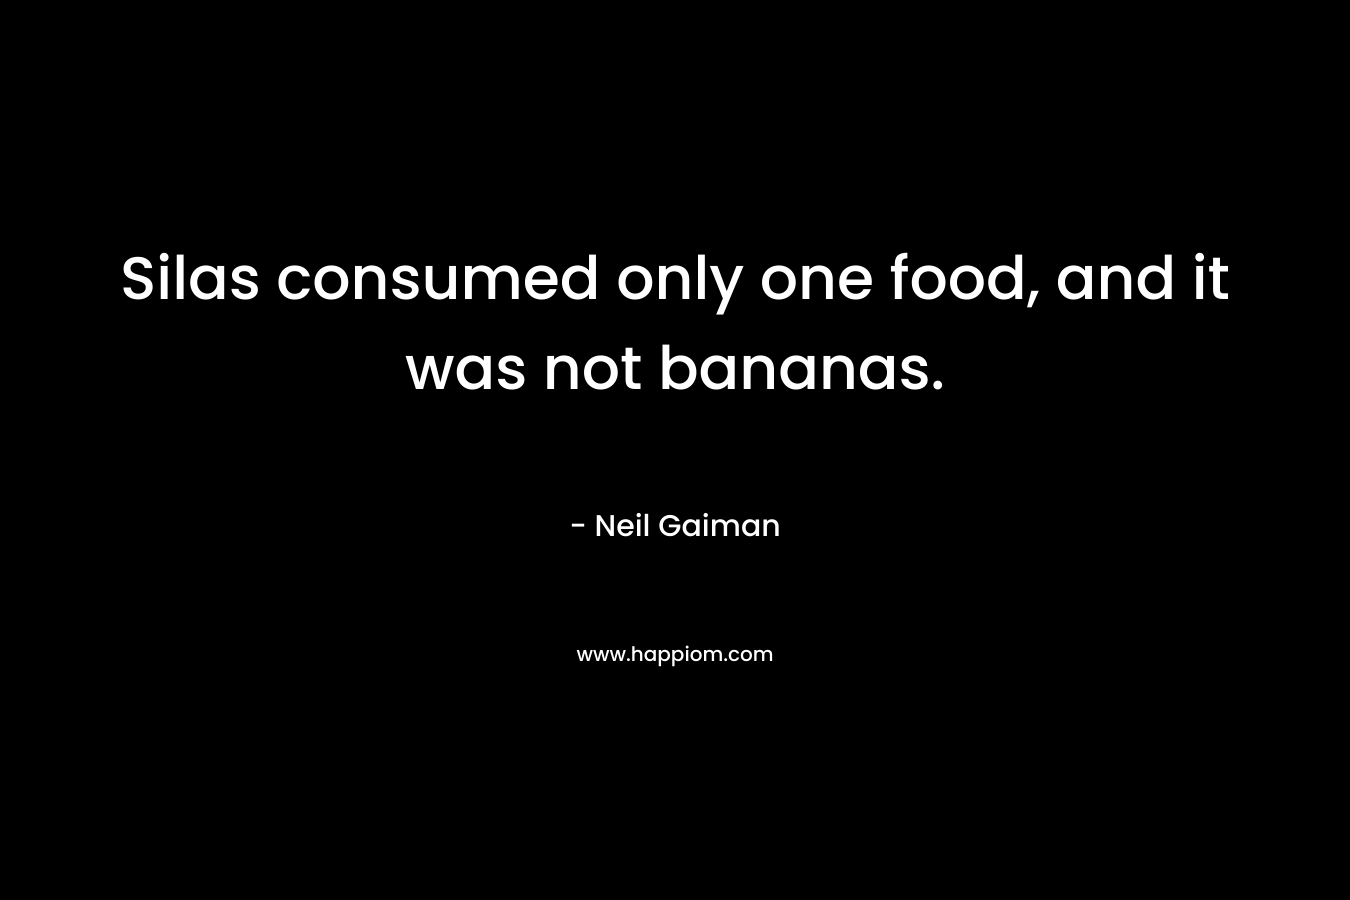 Silas consumed only one food, and it was not bananas. – Neil Gaiman